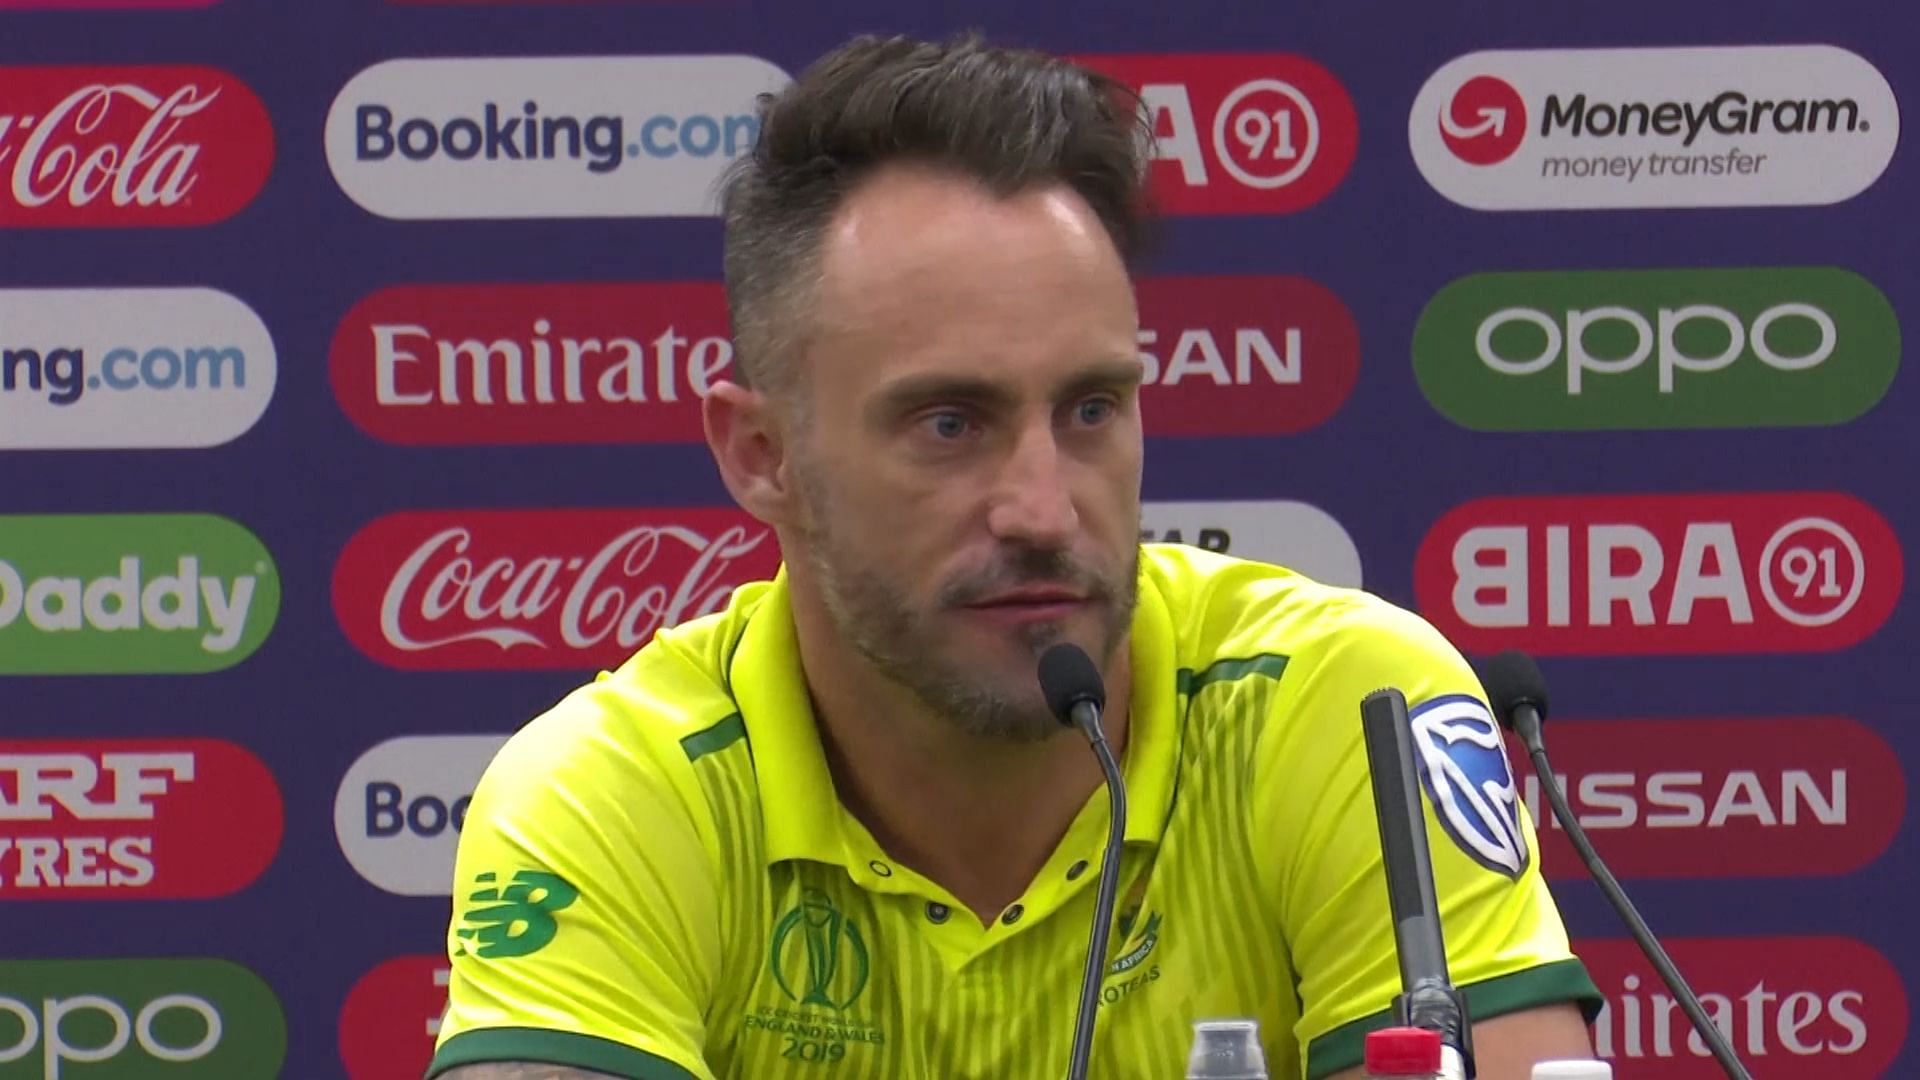 Faf Du Plessis spoke to the media on the eve of South Africa’s World Cup match against India.